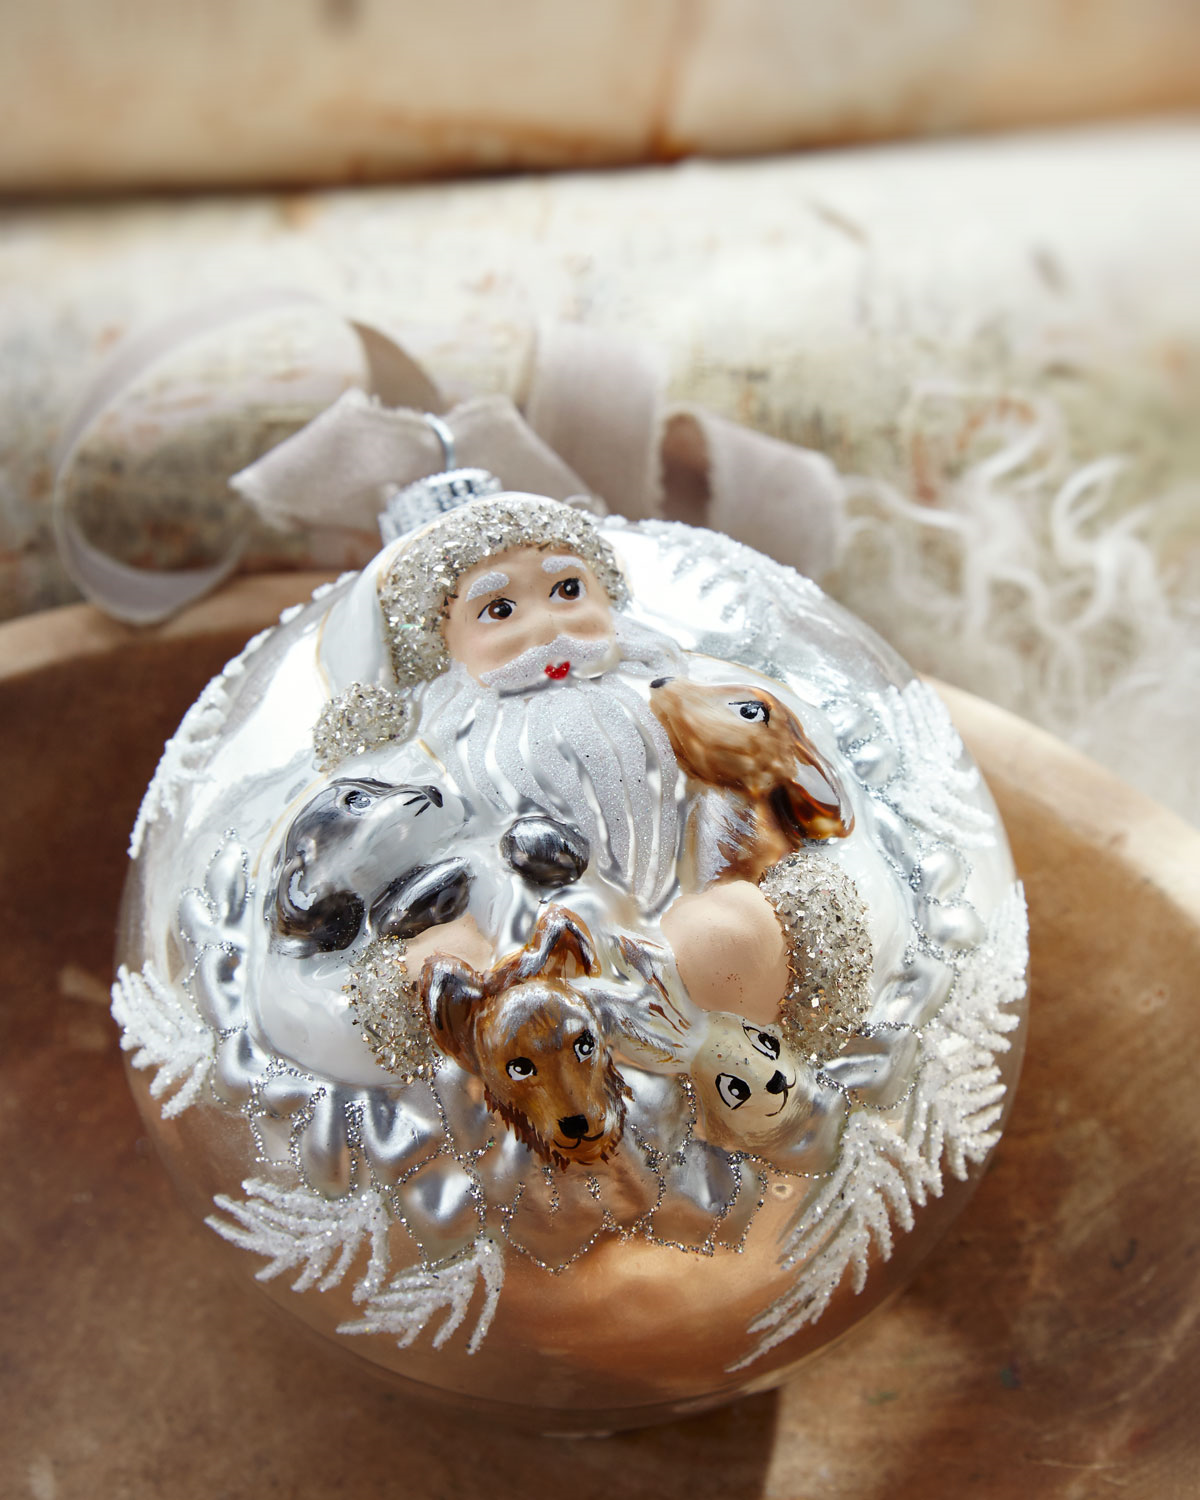 Large Fireplace Mantel Elegant Neiman Marcus Ball Christmas ornament with Santa and Friends $45 W Tax